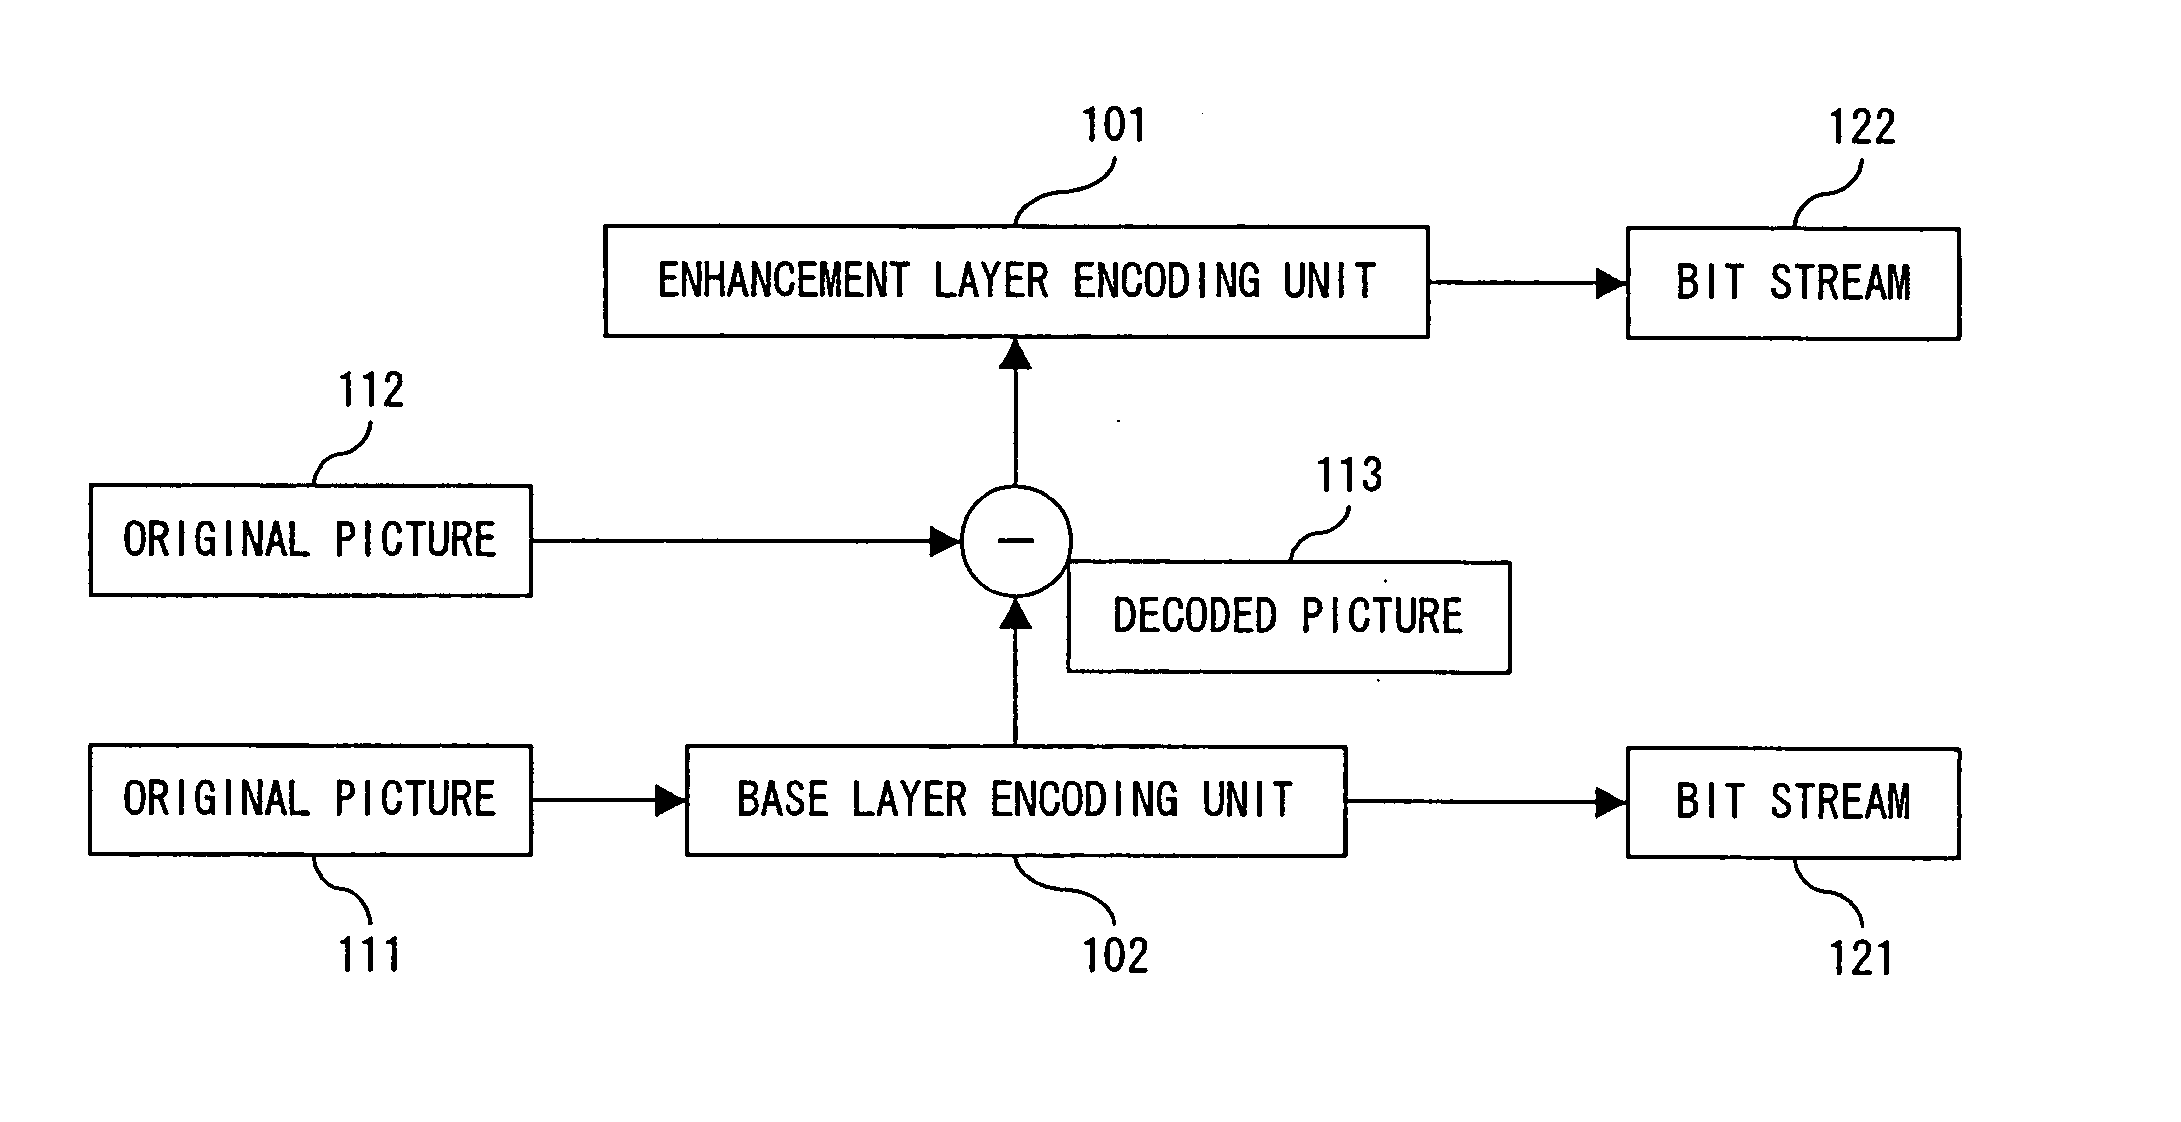 Hierarchical encoding and decoding devices